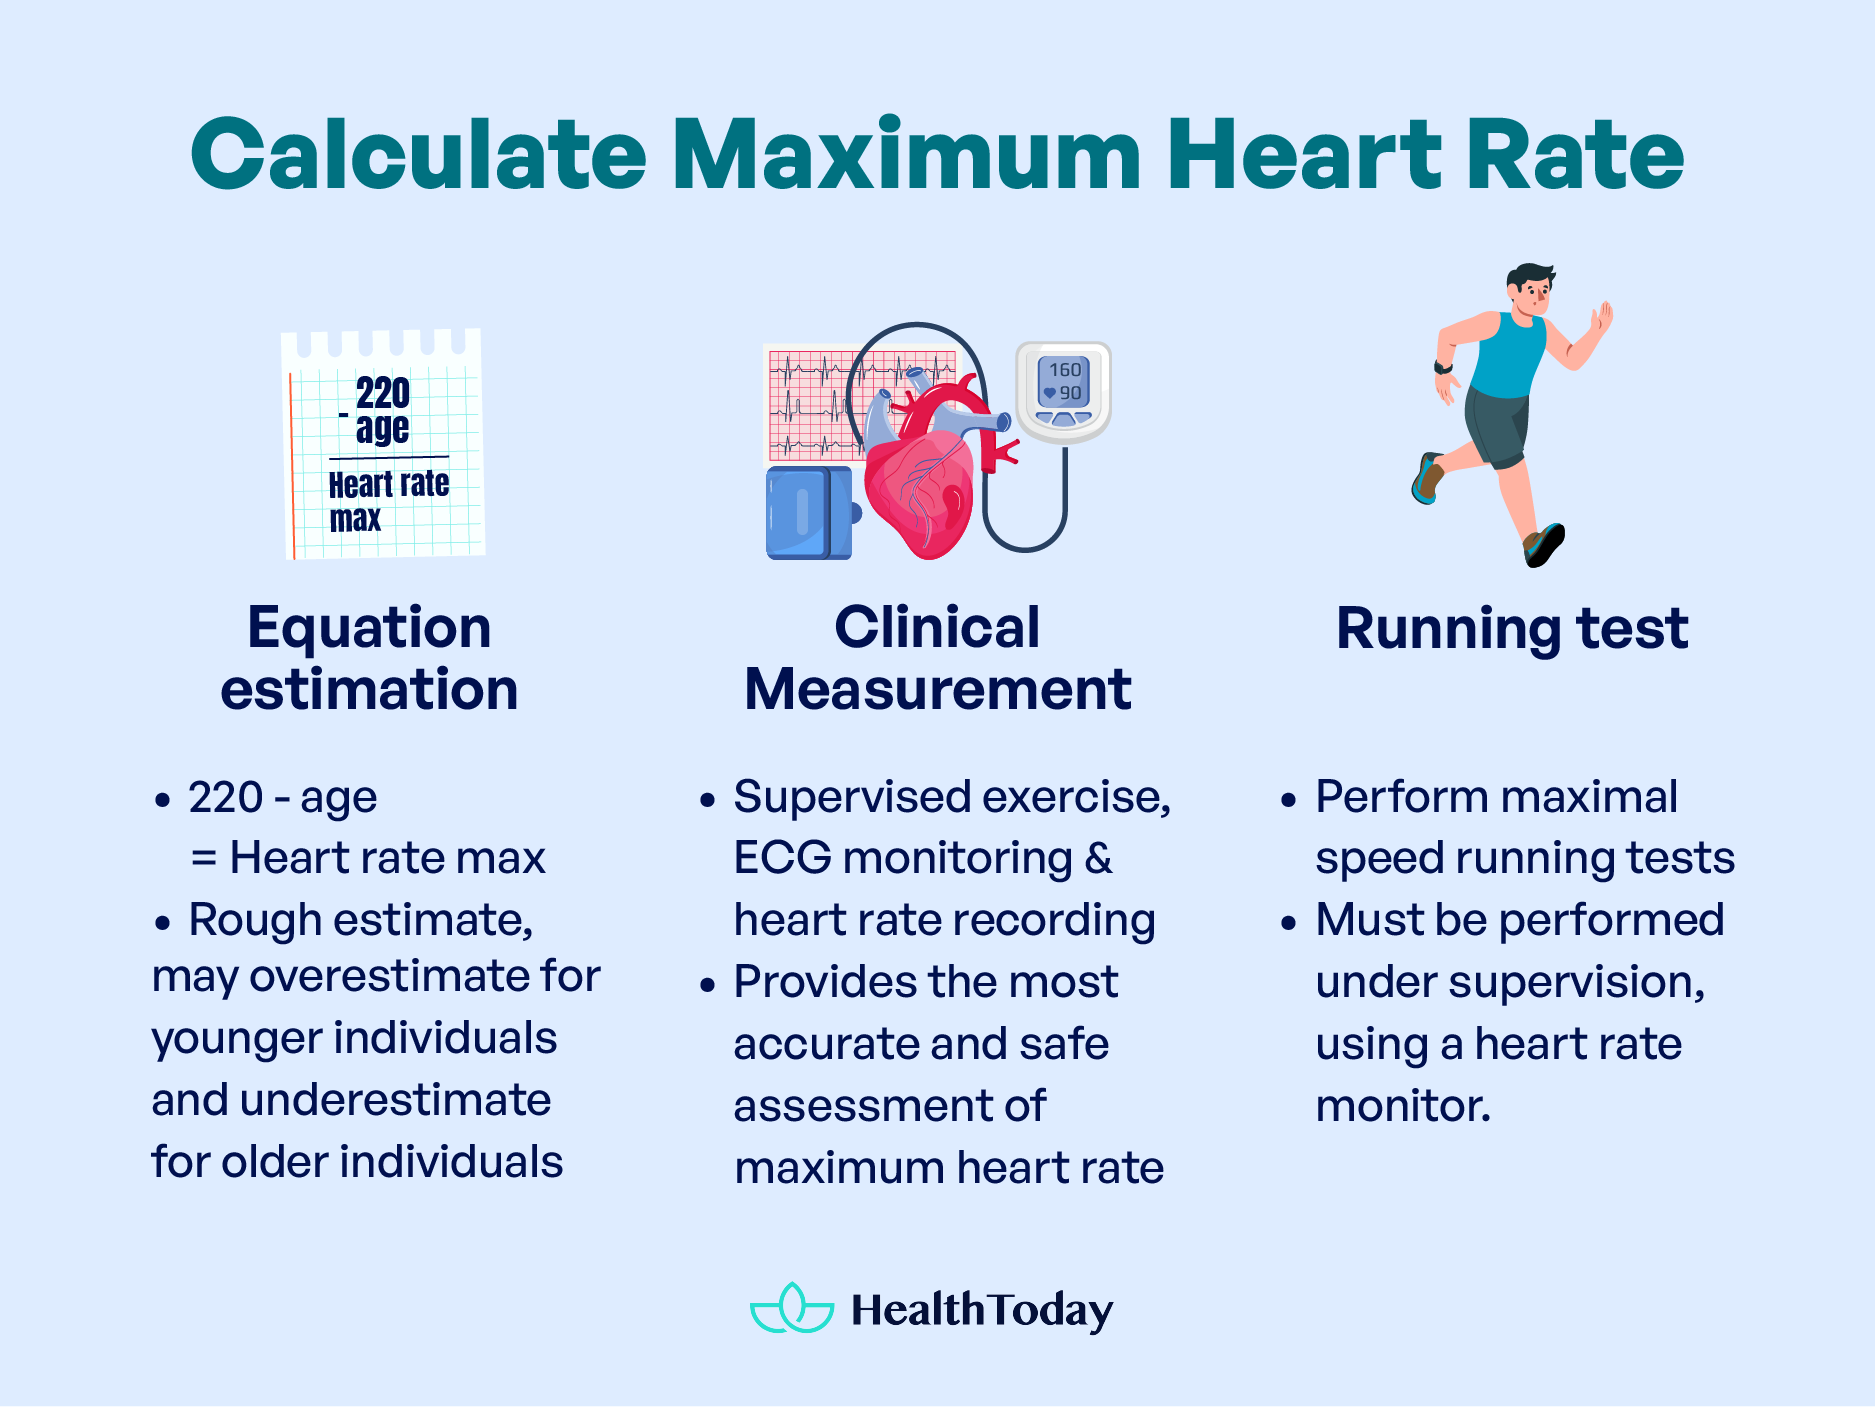 Average Heart Rate While Running Normal Heart Rate Heart Rate Zones 02